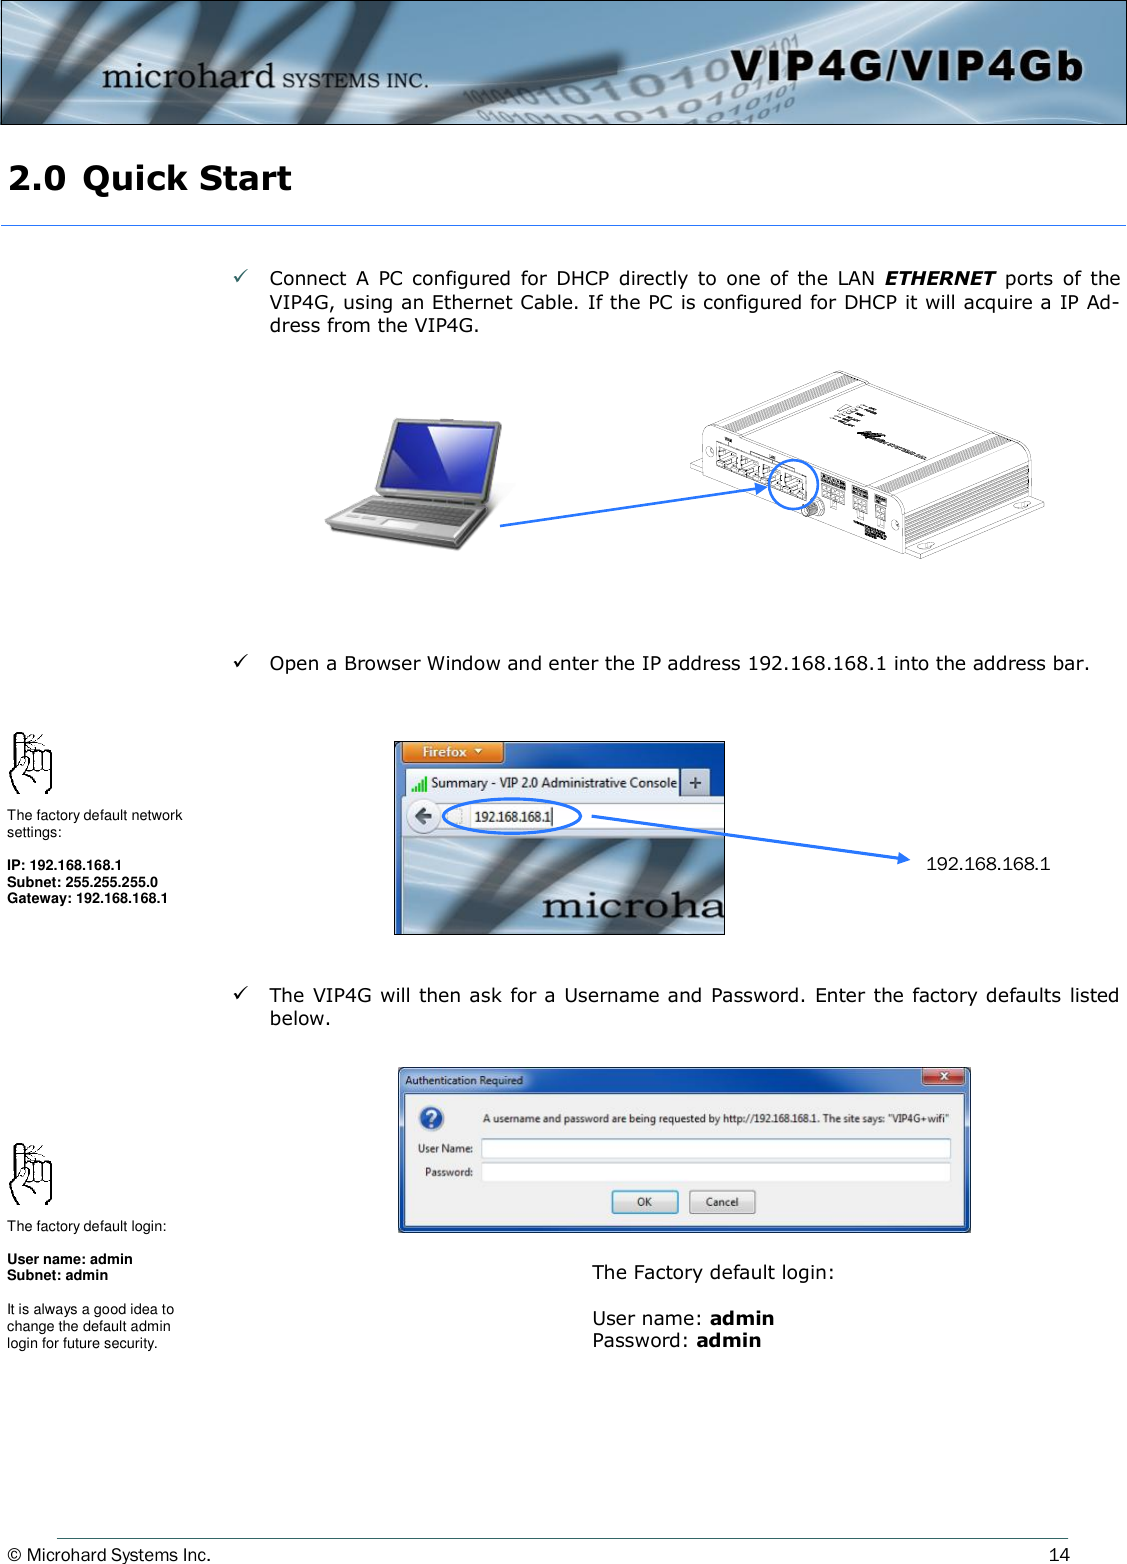 © Microhard Systems Inc.     14 2.0 Quick Start    Connect  A  PC configured  for  DHCP  directly  to  one  of  the  LAN  ETHERNET  ports  of  the VIP4G, using an Ethernet Cable. If the PC is configured for DHCP it will acquire a IP Ad-dress from the VIP4G.             Open a Browser Window and enter the IP address 192.168.168.1 into the address bar.             The VIP4G will then ask for a Username and Password. Enter the factory defaults listed below.     192.168.168.1 The factory default network settings:  IP: 192.168.168.1 Subnet: 255.255.255.0 Gateway: 192.168.168.1 The Factory default login:  User name: admin Password: admin The factory default login:  User name: admin Subnet: admin  It is always a good idea to change the default admin login for future security. 